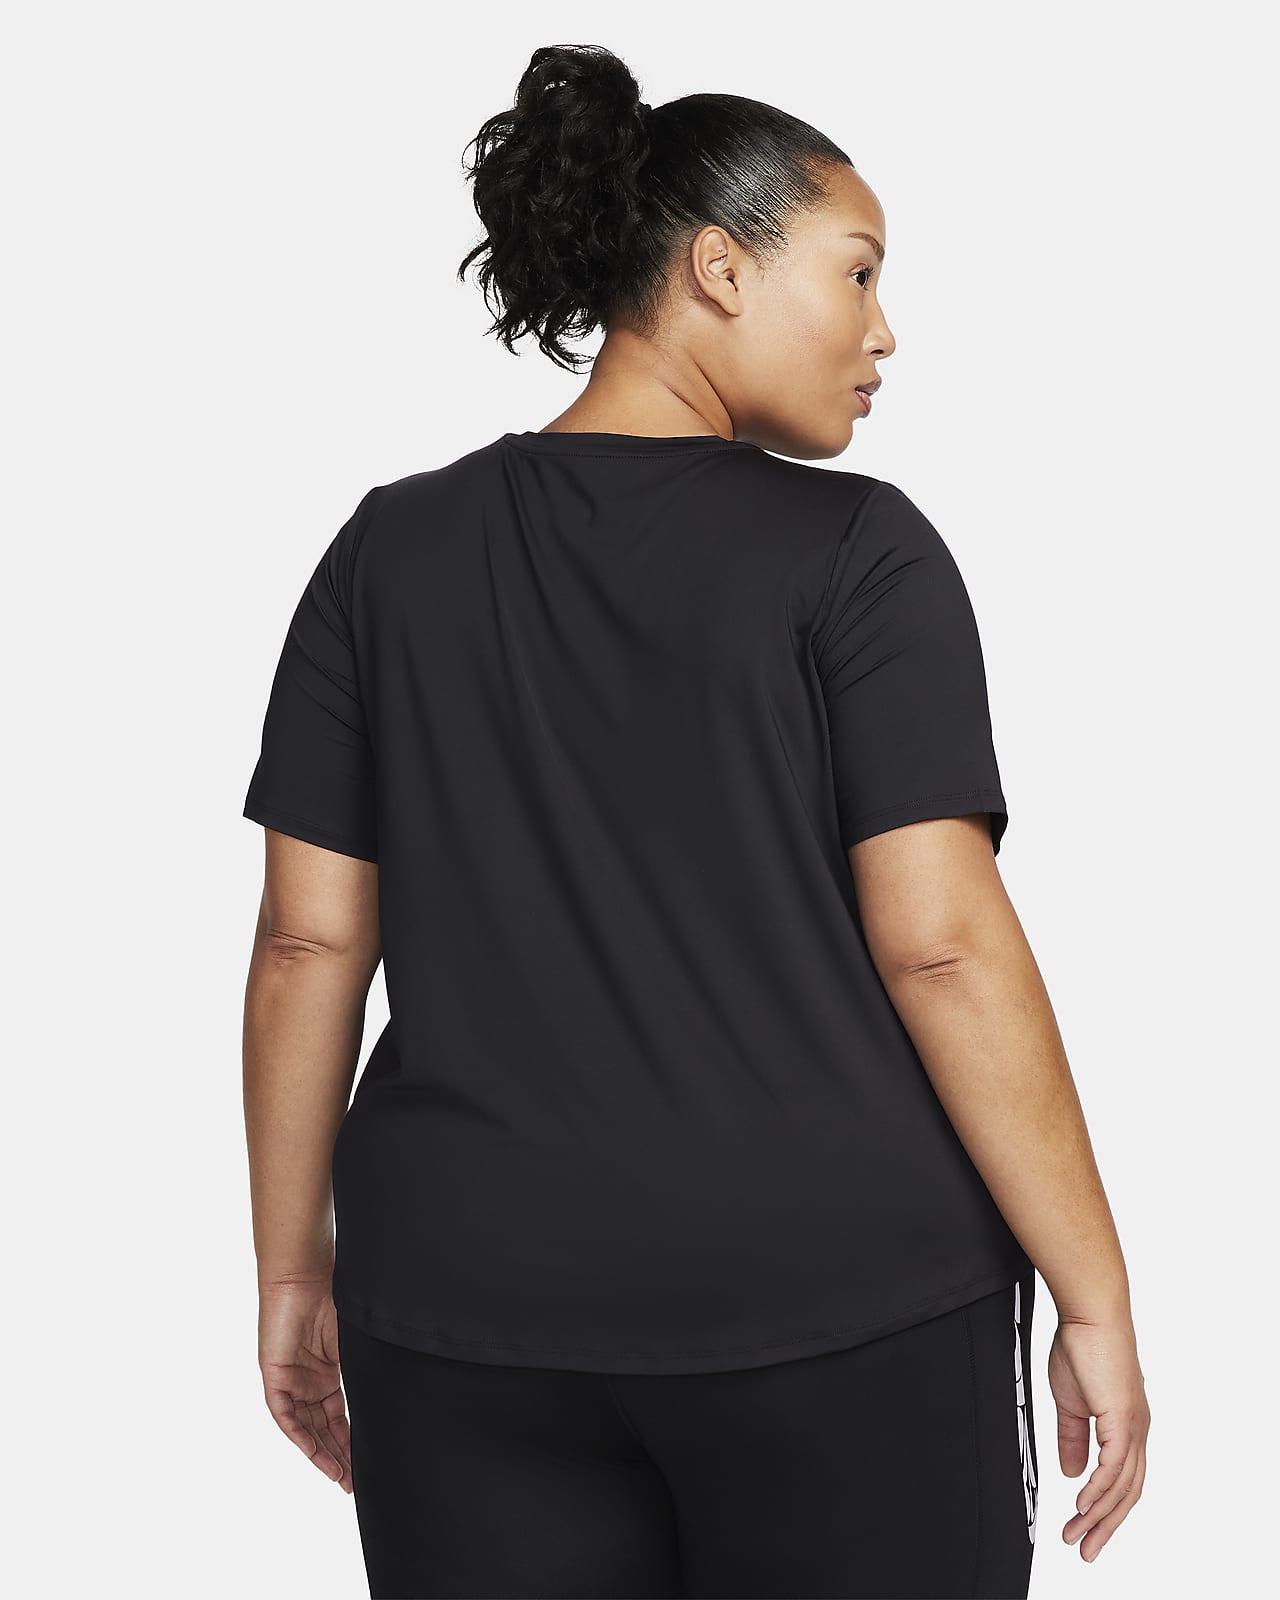 Womens Plus Size Running Tops & T-Shirts.